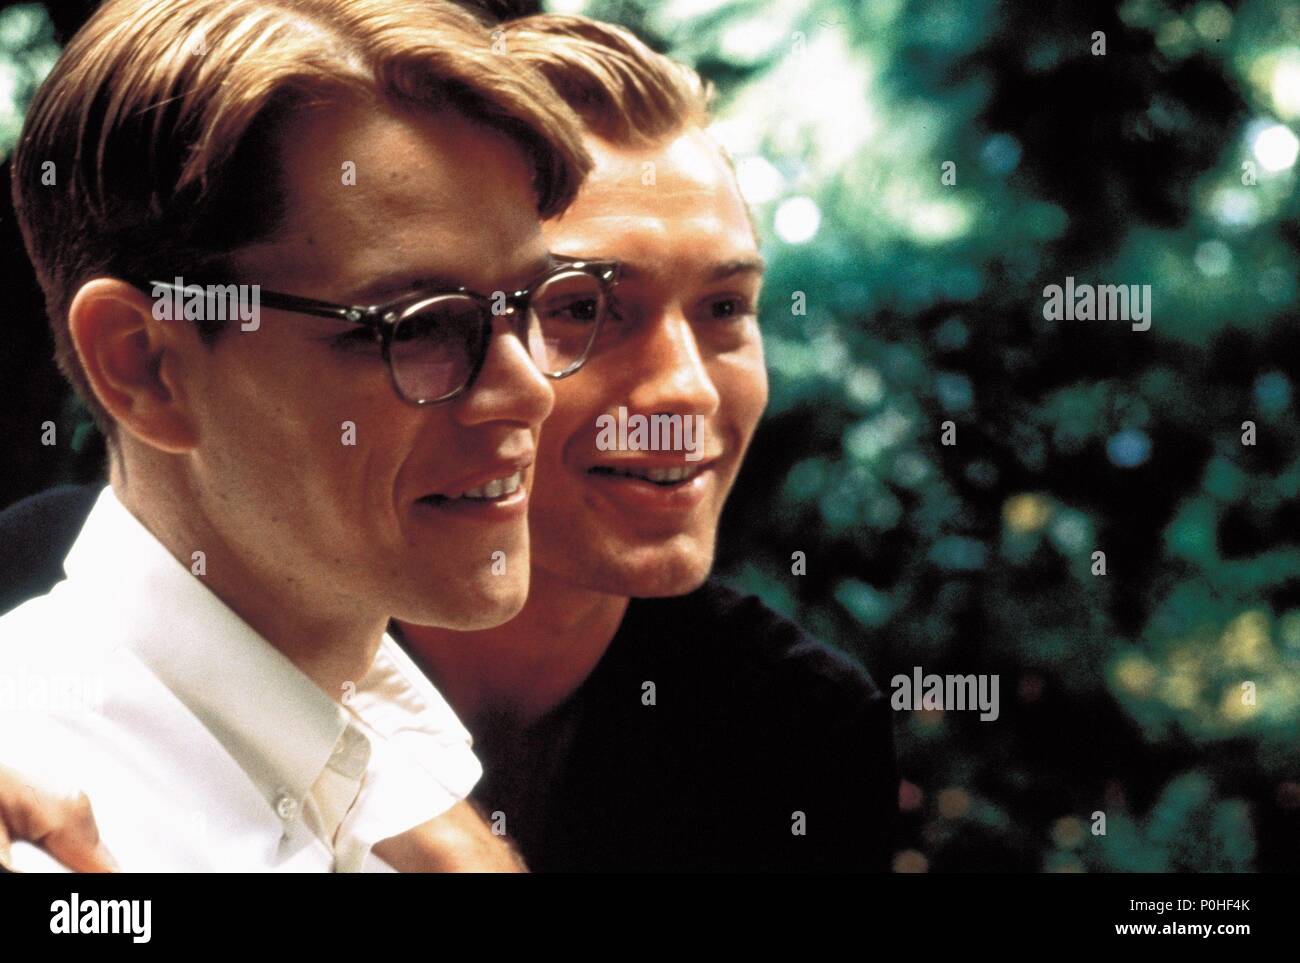 Original Film Title: THE TALENTED MR. RIPLEY. English Title: THE TALENTED  MR. RIPLEY. Film Director: ANTHONY MINGHELLA. Year: 1999. Stars: JUDE LAW; MATT  DAMON. Copyright: Editorial inside use only. This is a